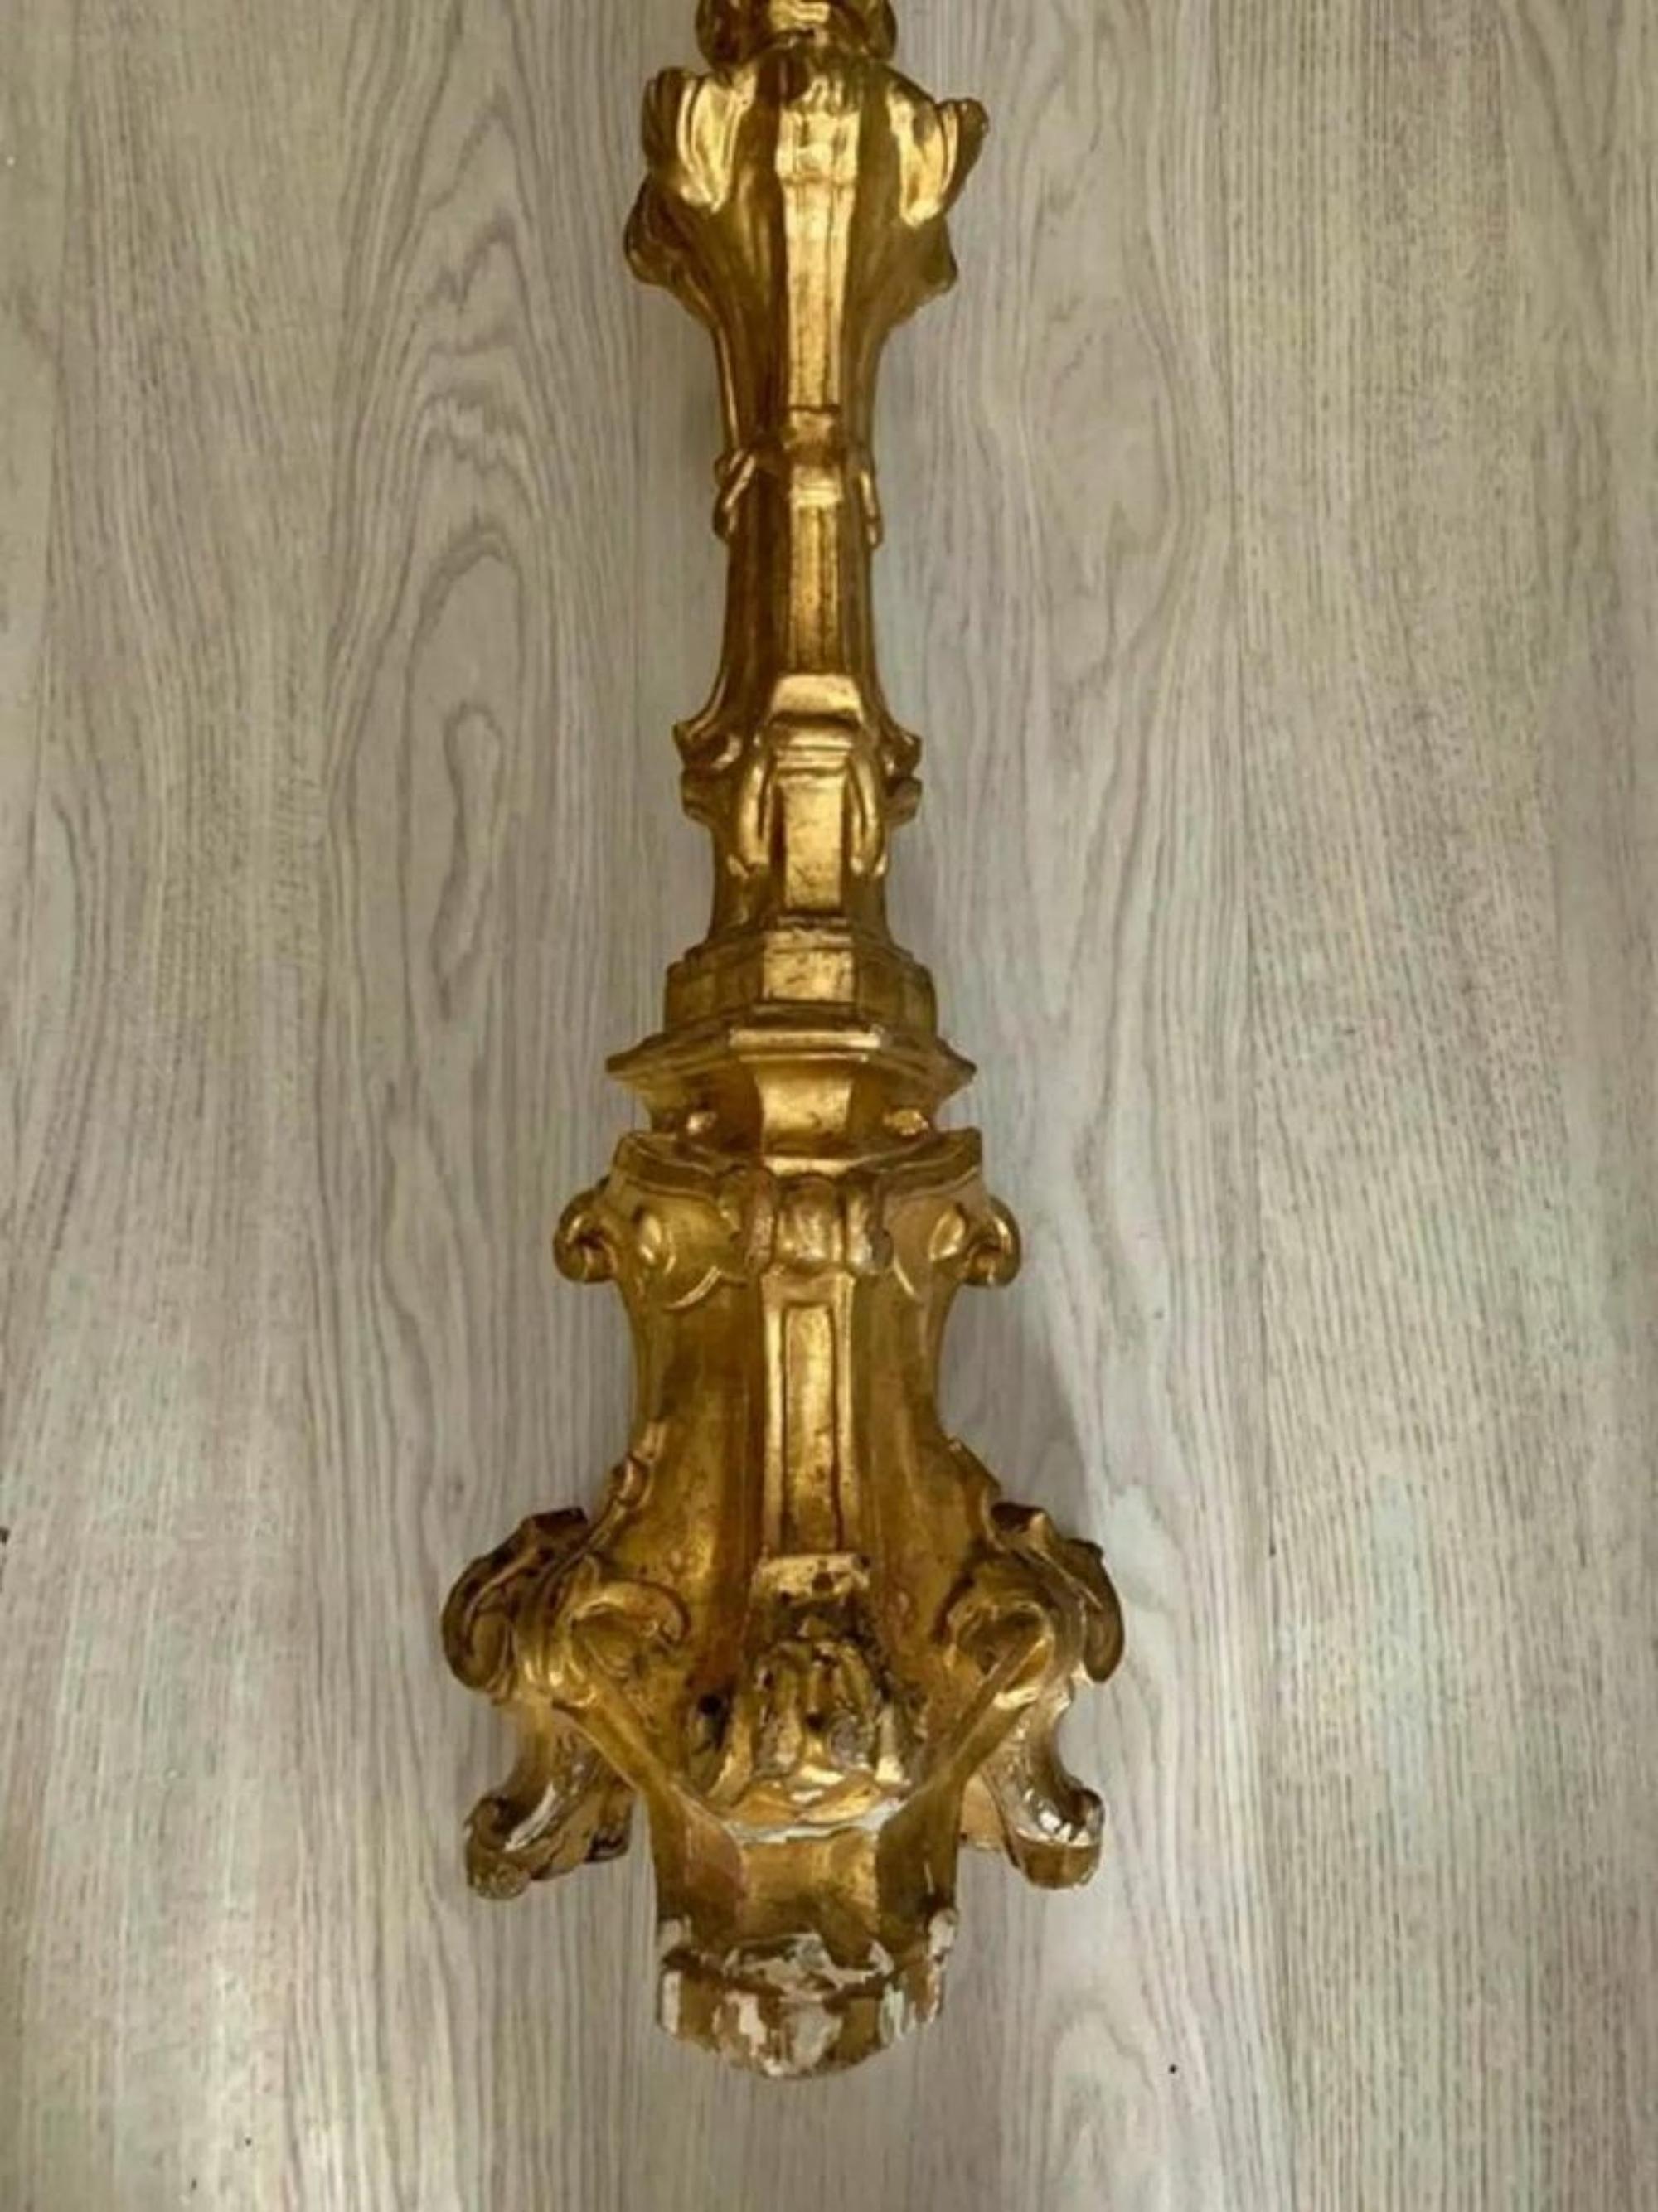 Title: Chandelier
Date/Period: 18th century
Dimension: 84cm
Materials: golden painted wood
Additional Information: Italian candle holder from the 18th century.

 